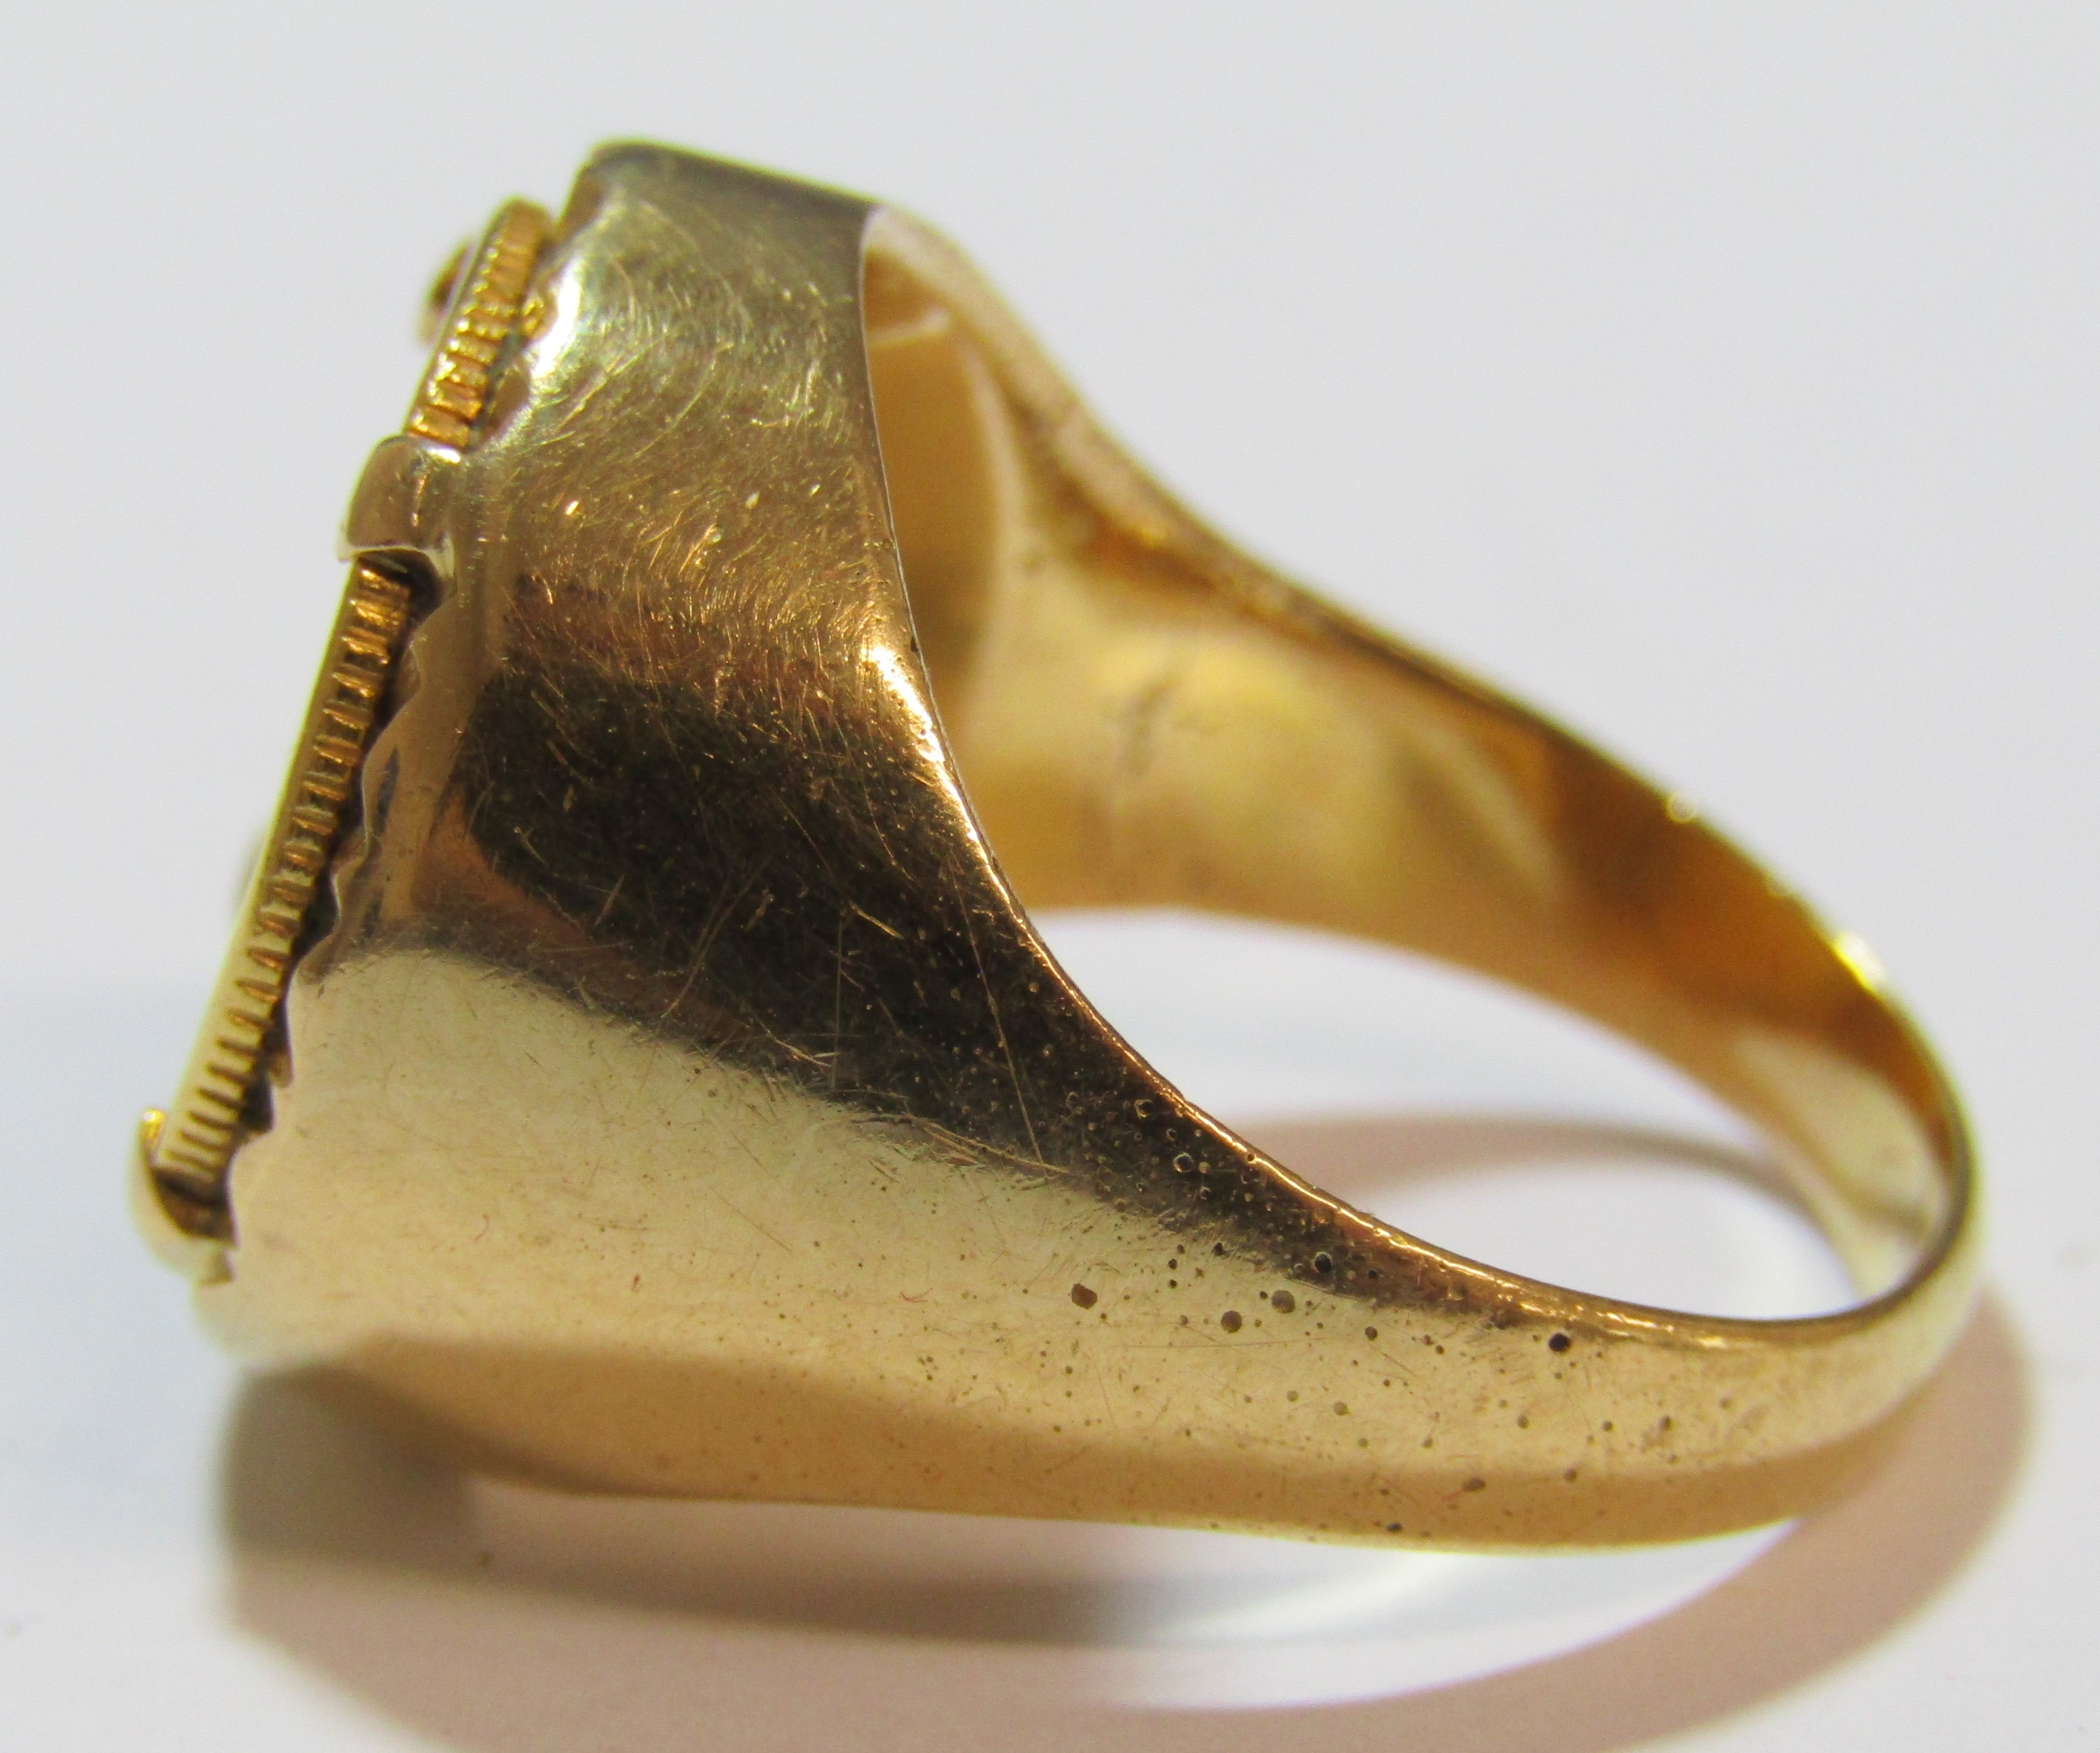 Tested as 9ct gold ring mounted with 22ct Phalavi Mohammad Reza Shah Iran gold quarter - ring size N - Image 2 of 6